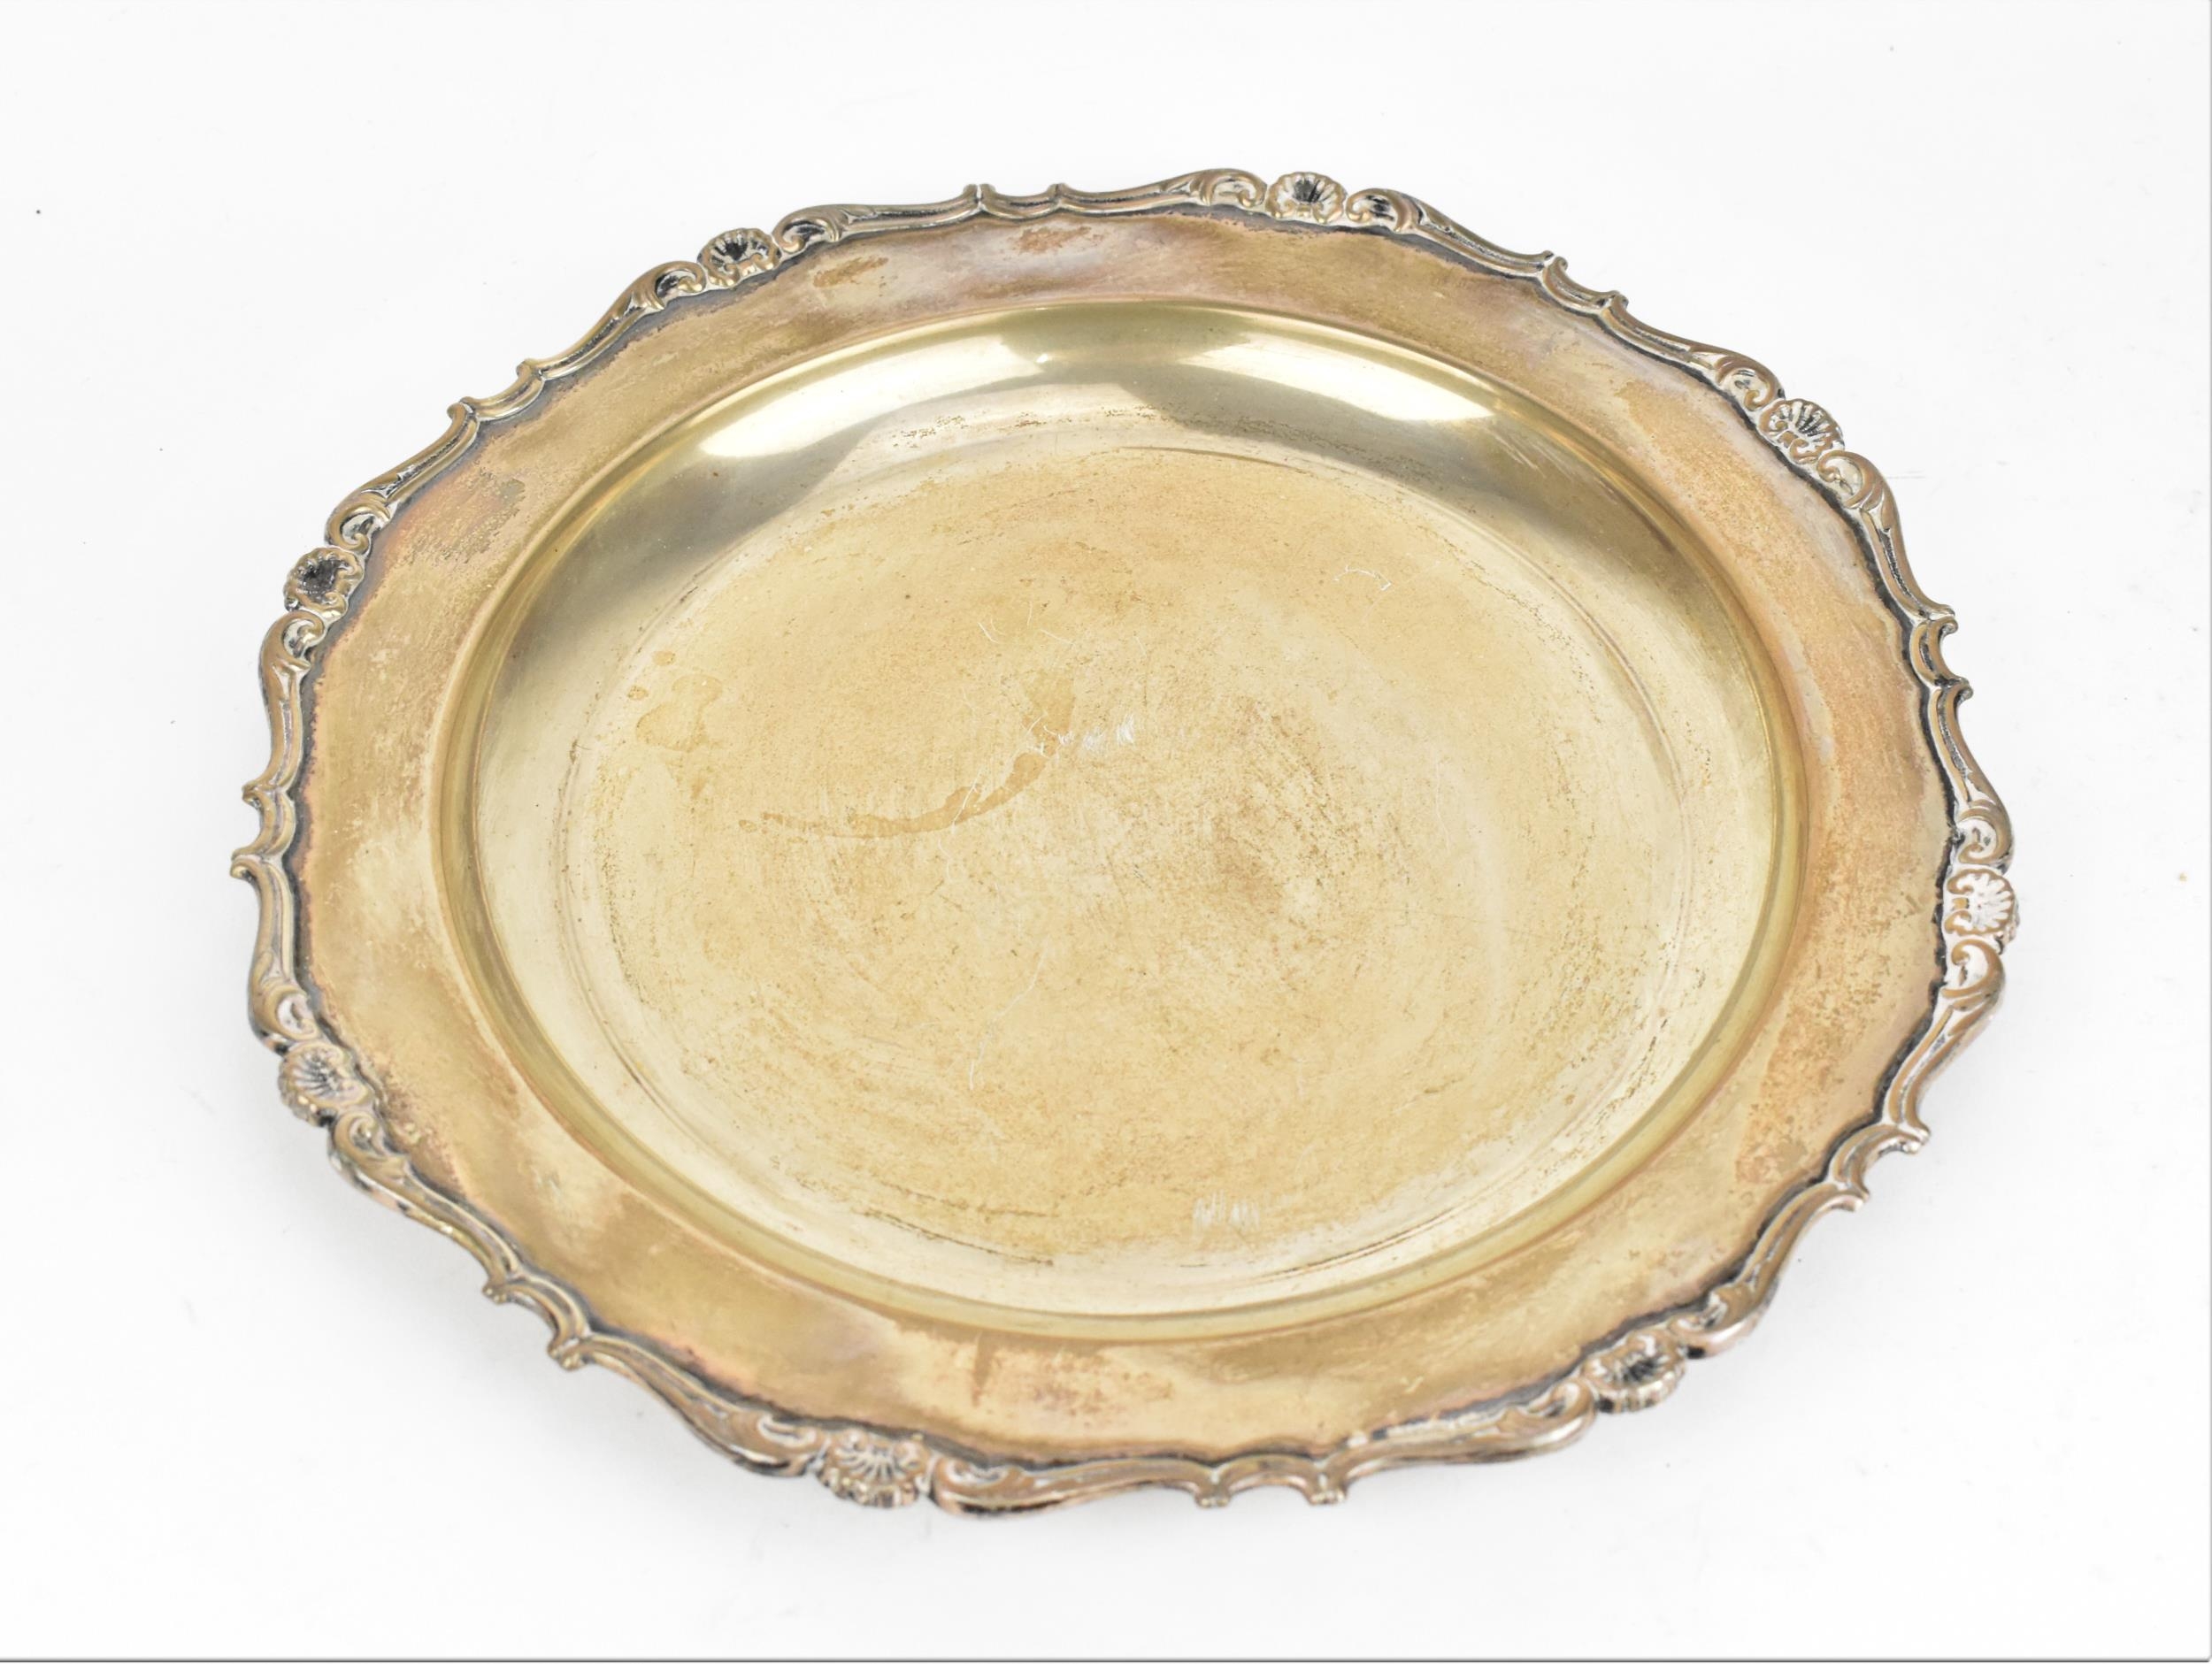 A Continental silver circular dish, probably Italian, with moulded shell border, stamped 800, 23.5